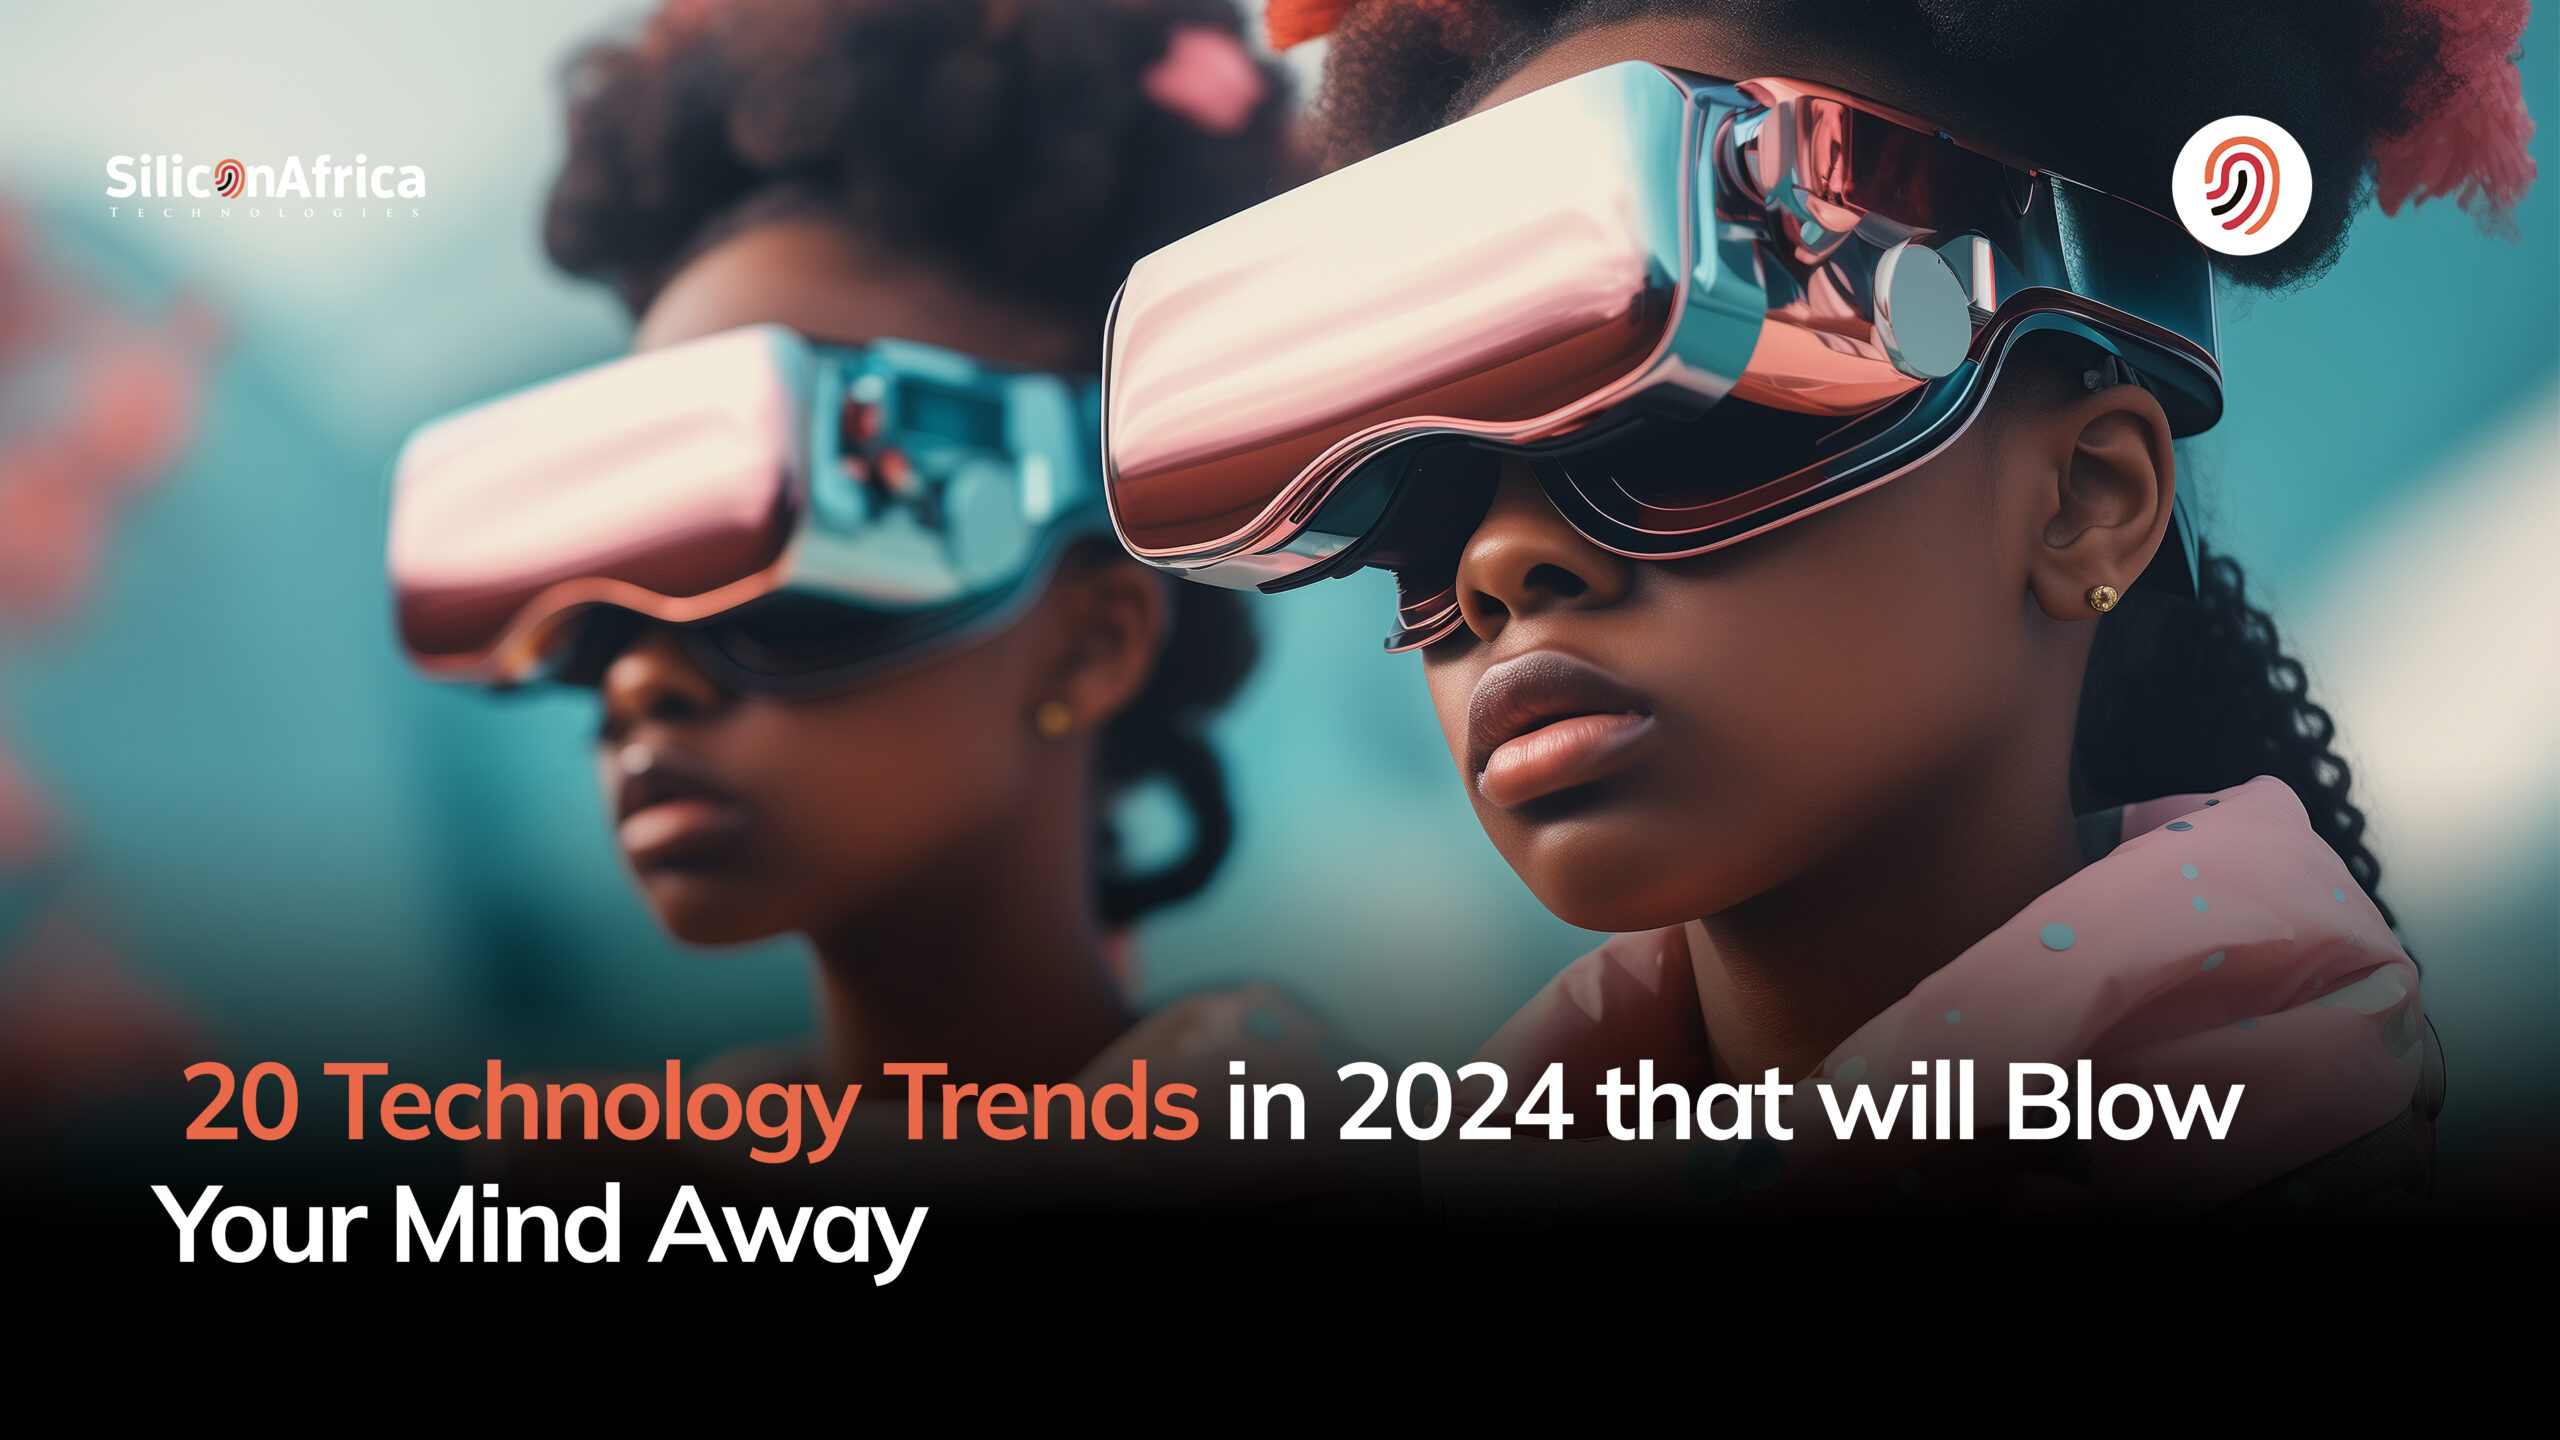 20 Technology Trends in 2024 that will Blow Your Mind Away